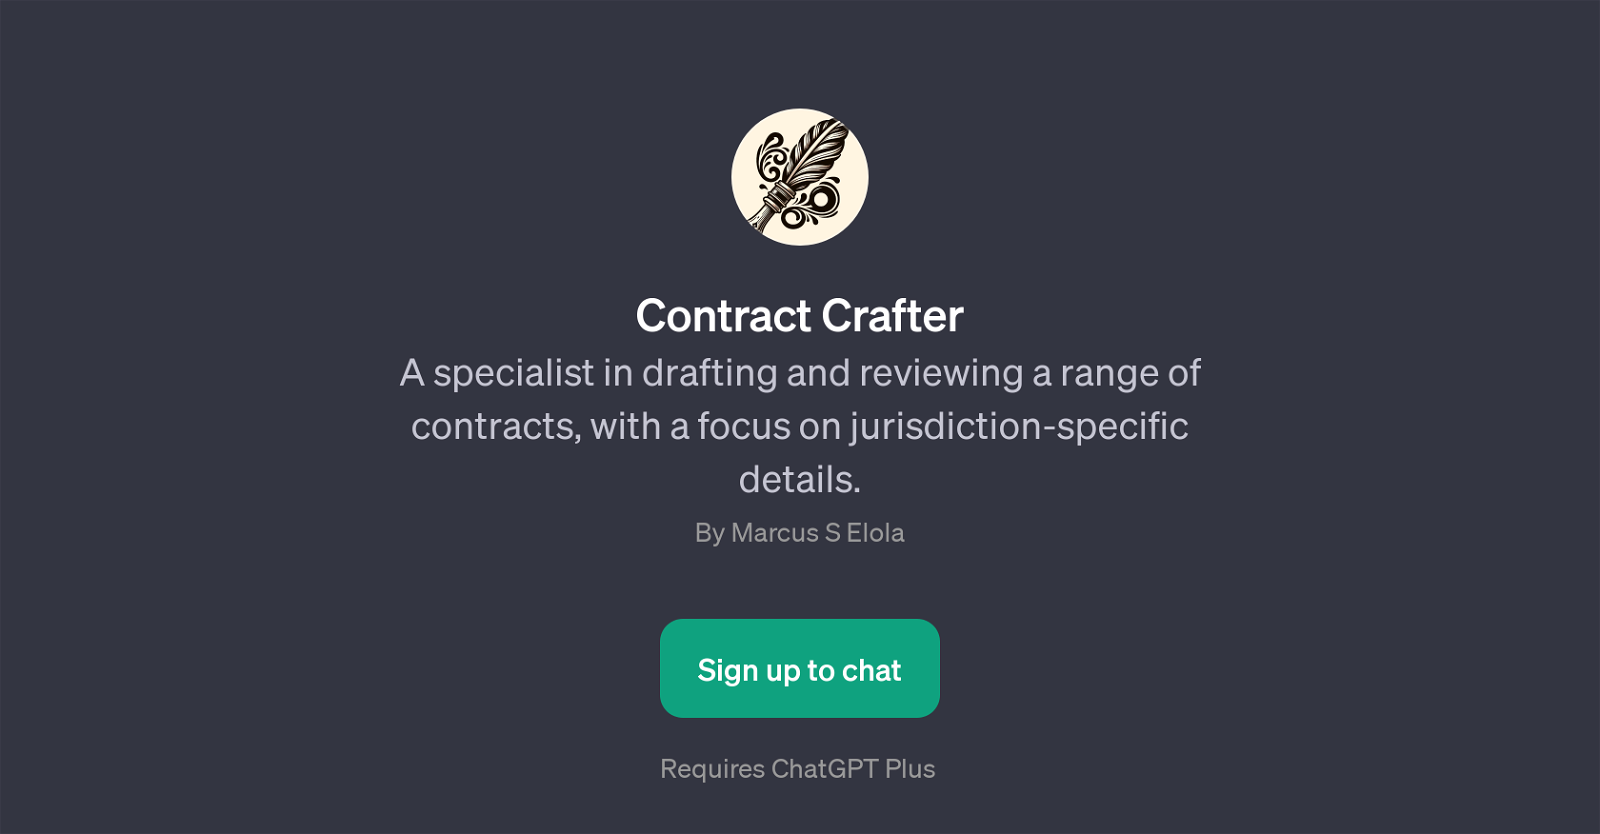 Contract Crafter website